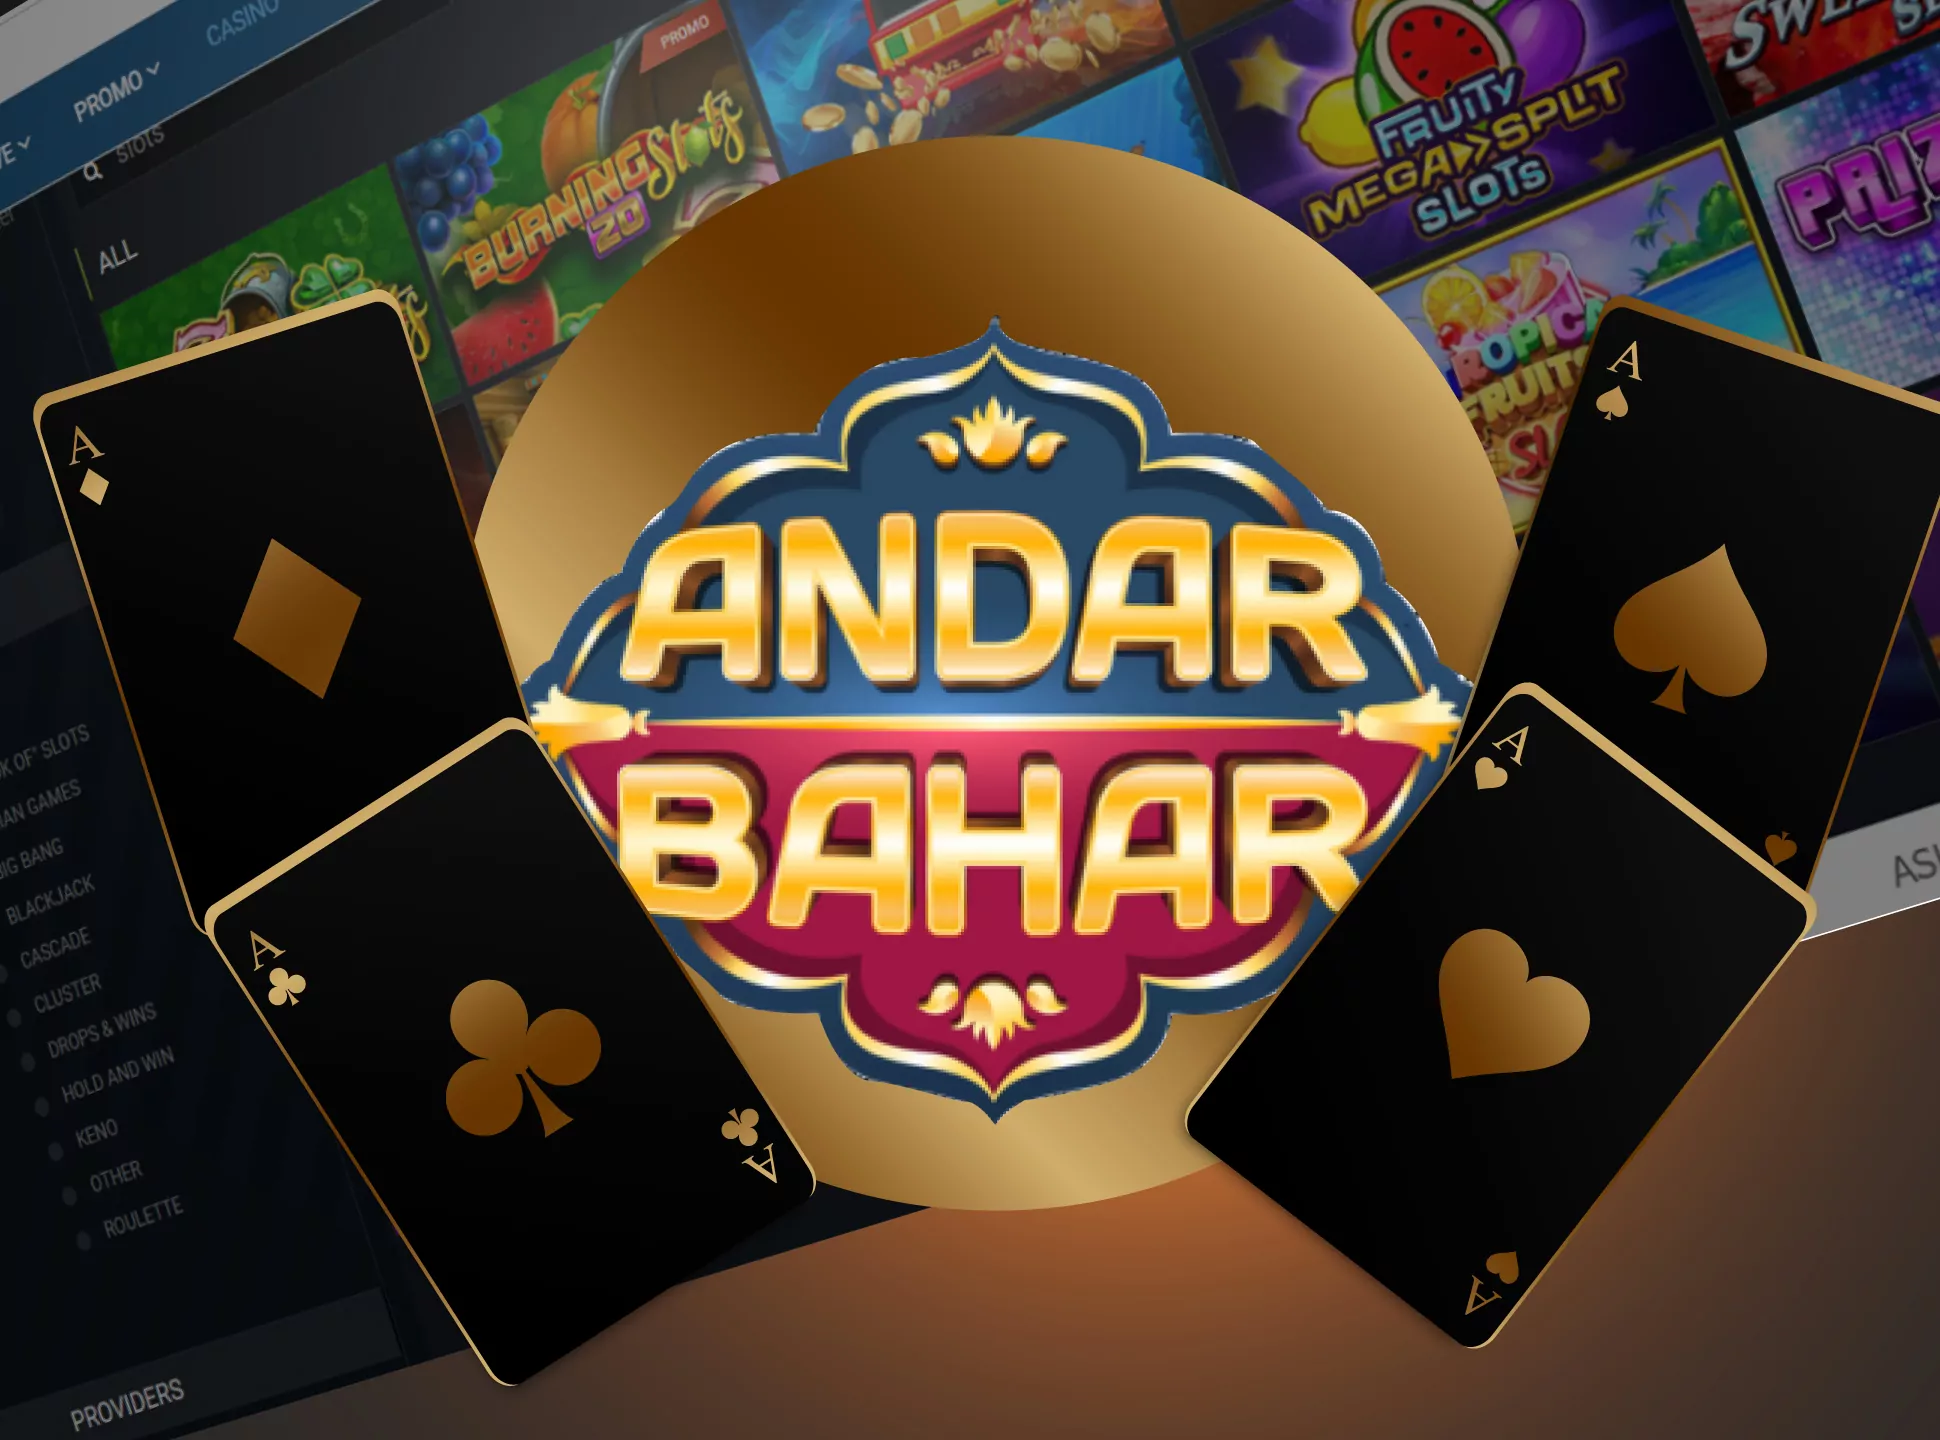 You can also play traditional games like Andar Bahar in many online casinos.